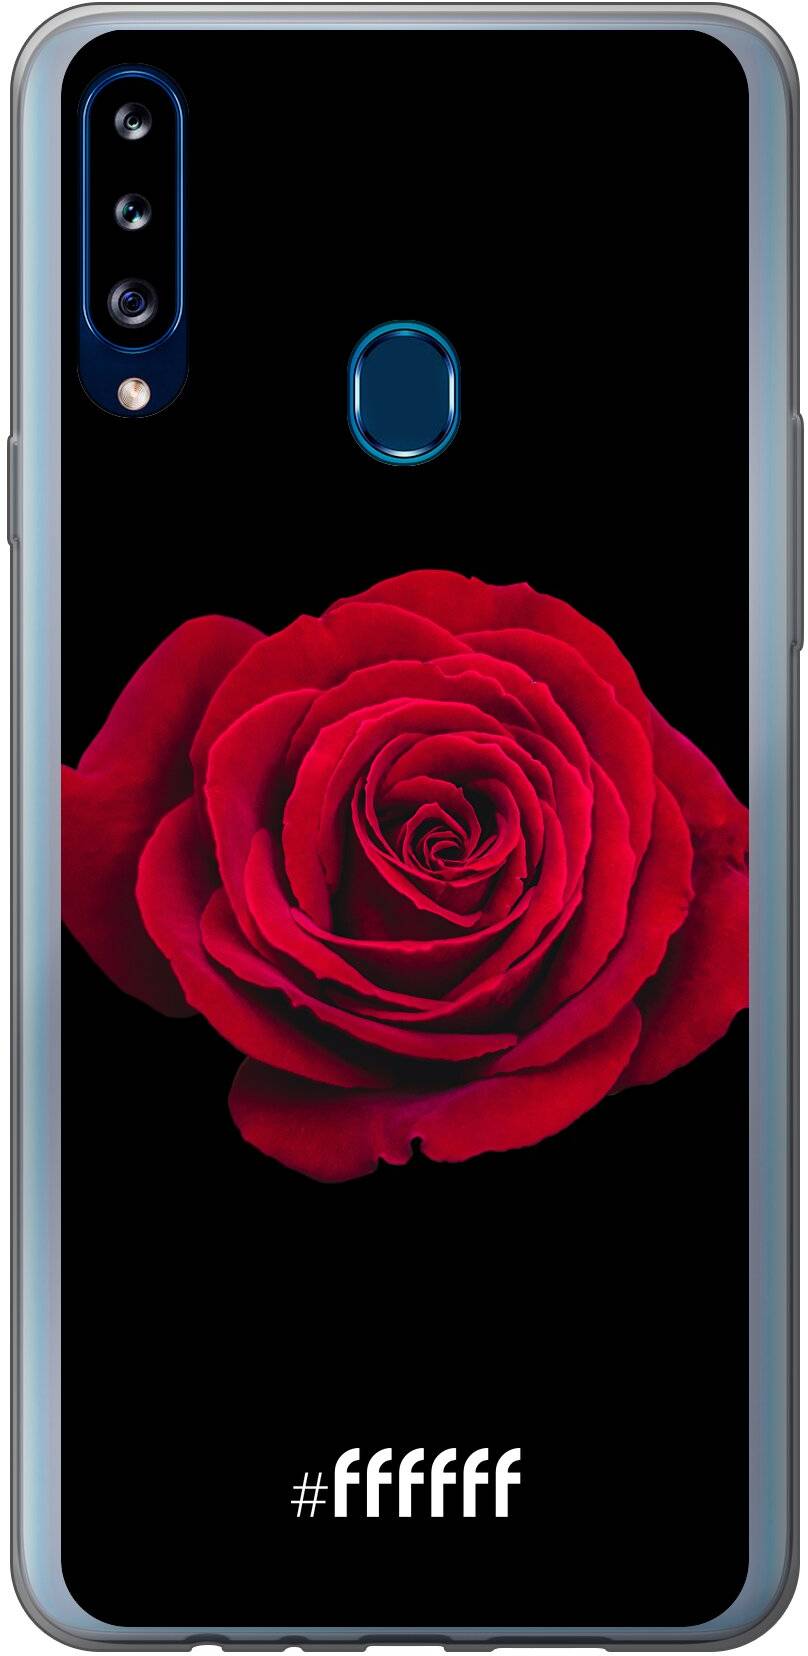 Radiant Rose Galaxy A20s